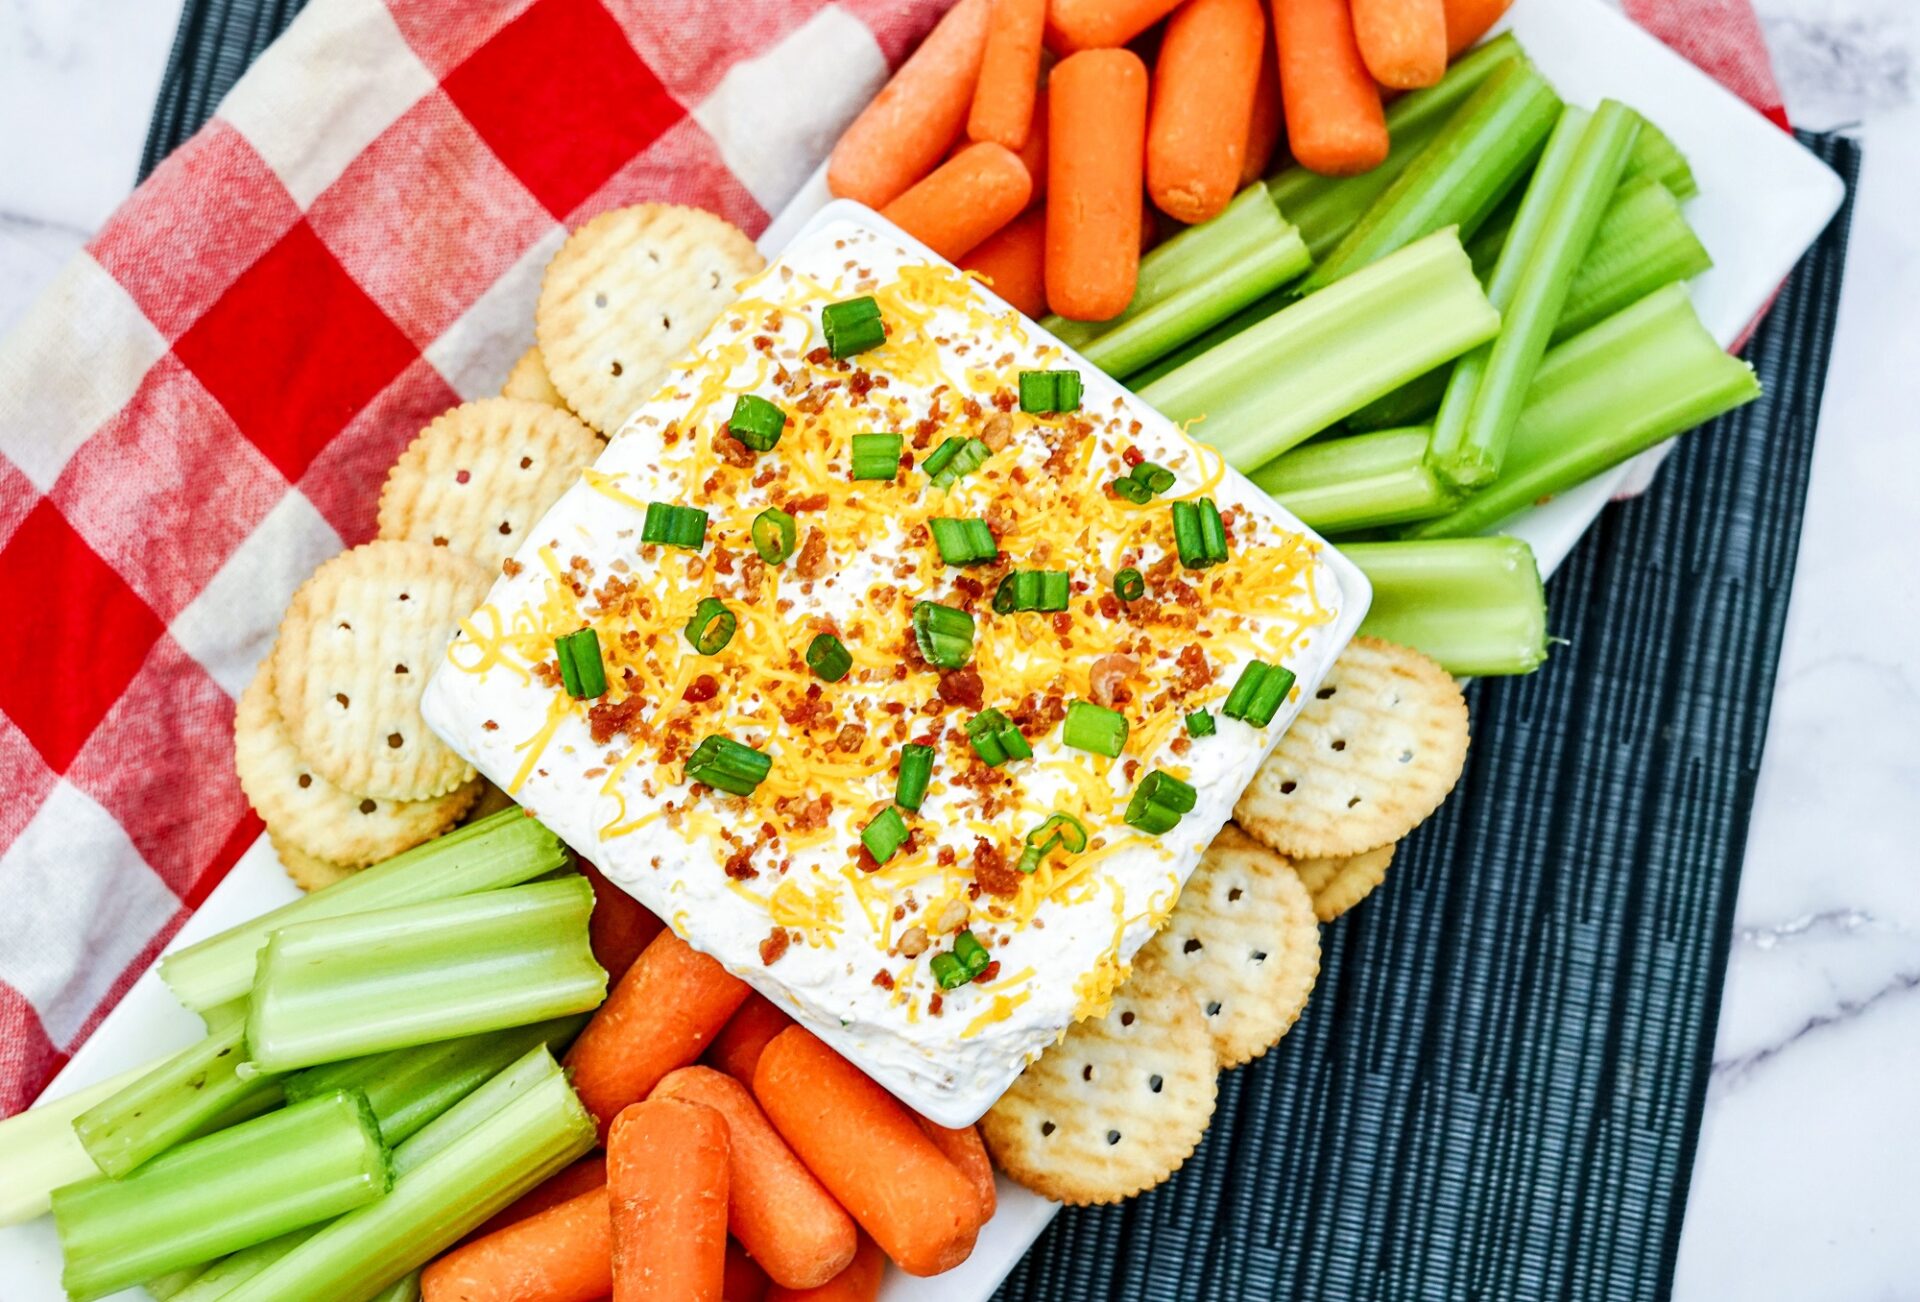 Cheddar Bacon Ranch Dip in a bowl surrounded with crackers, carrots and celery.